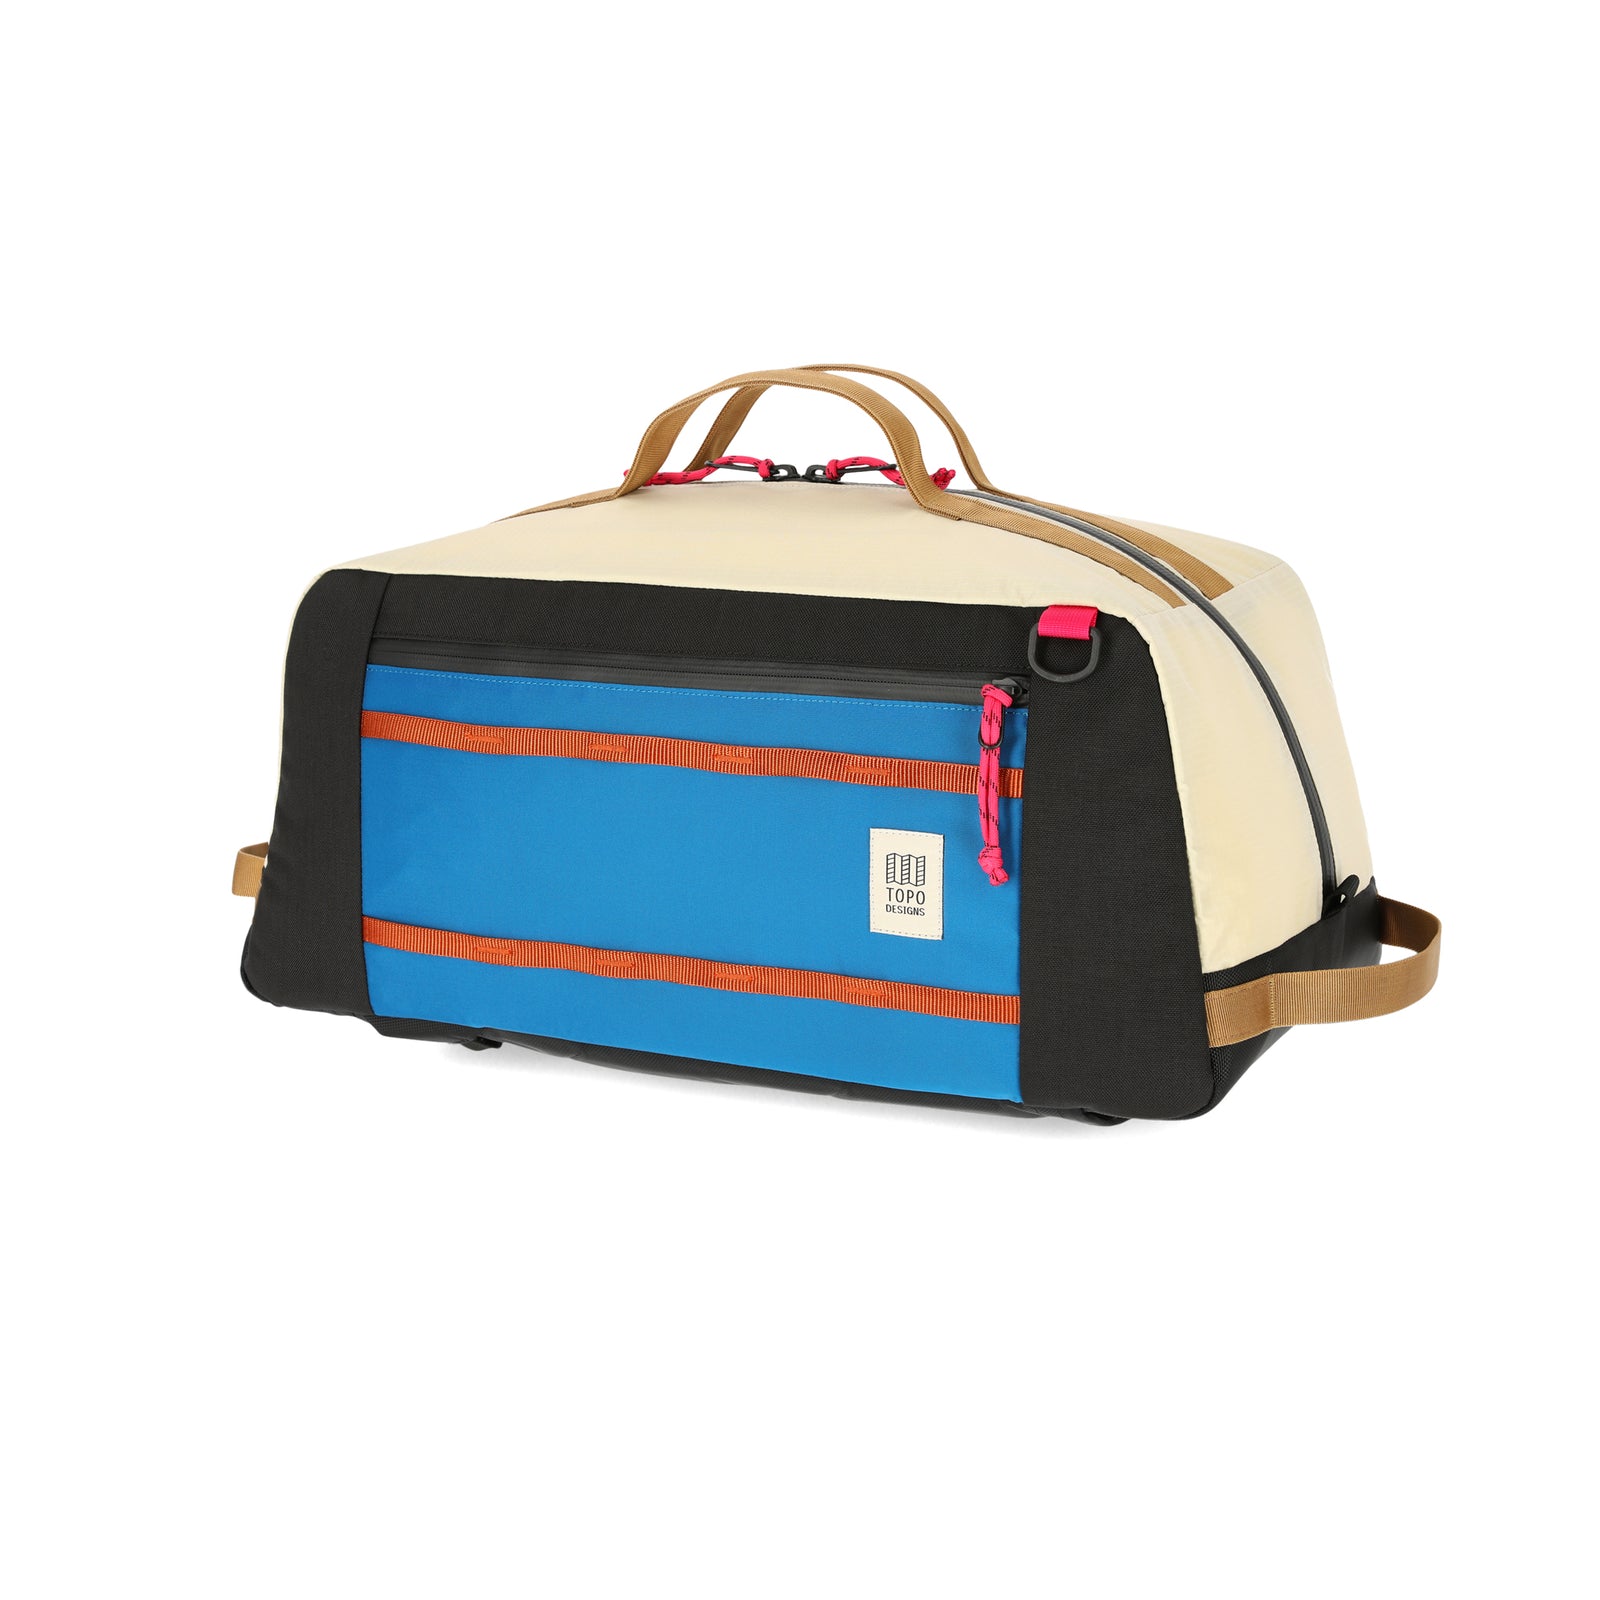 Topo Designs Mountain Duffel 40L backpack gear bag in recycled "Bone White / Blue" nylon.